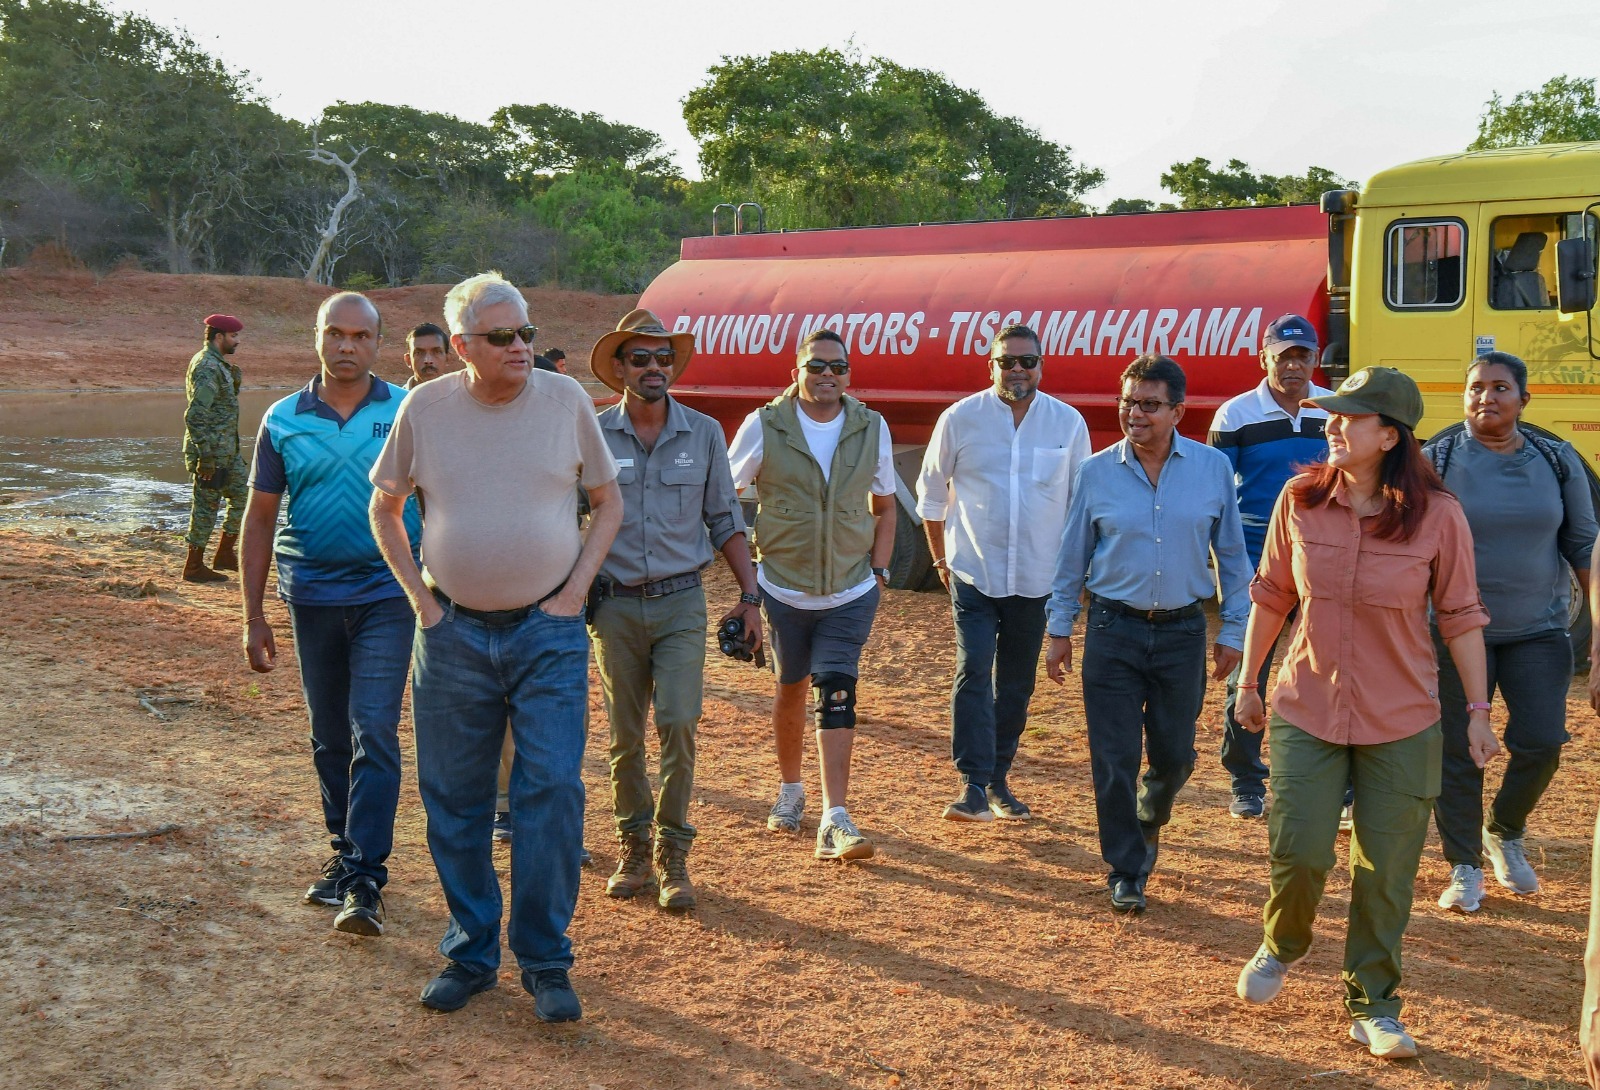 President Wickremesinghe Explores Yala National Park and Advocates Online Ticketing